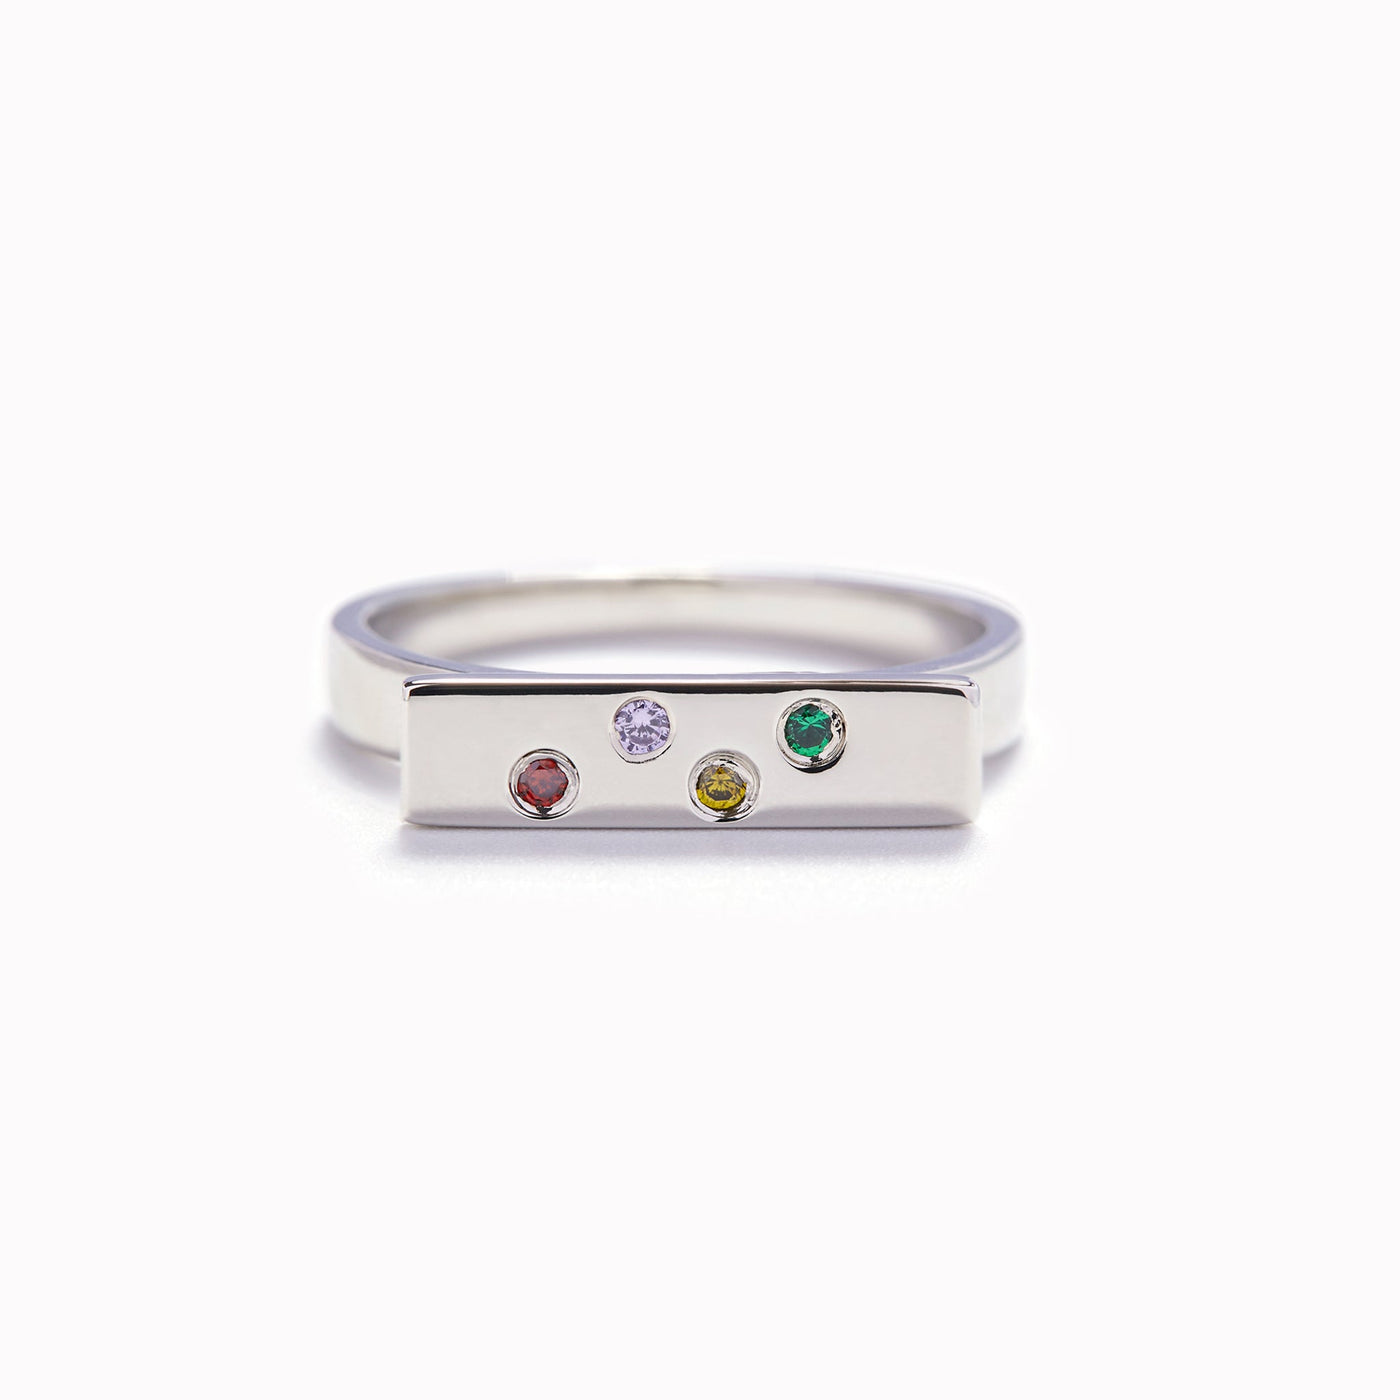 PERSONALIZED 1-5 BIRTHSTONES BALANCE OF LIFE RING